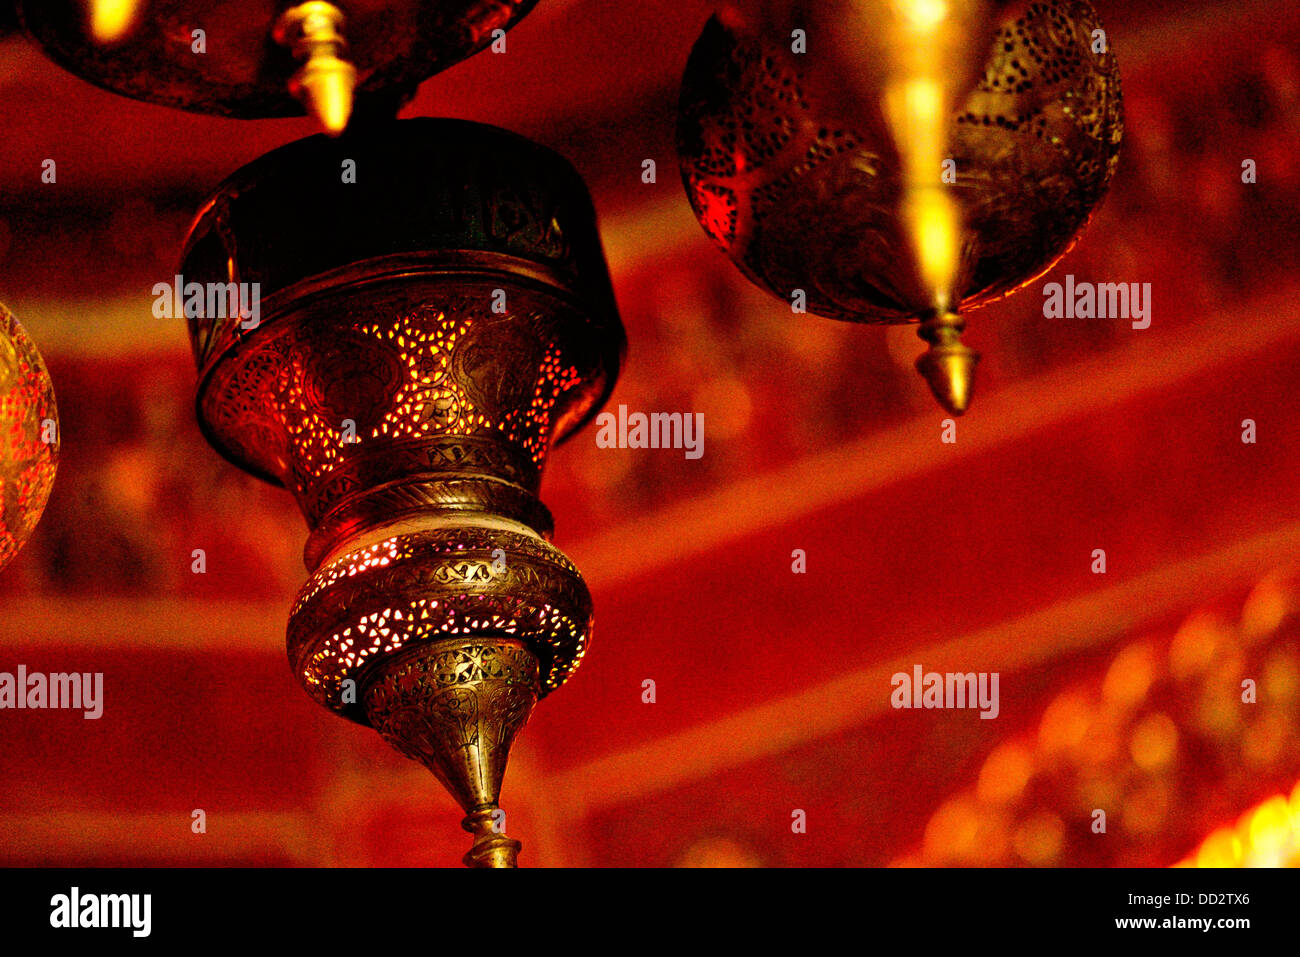 Ornate molding on a Moroccan lamp Stock Photo